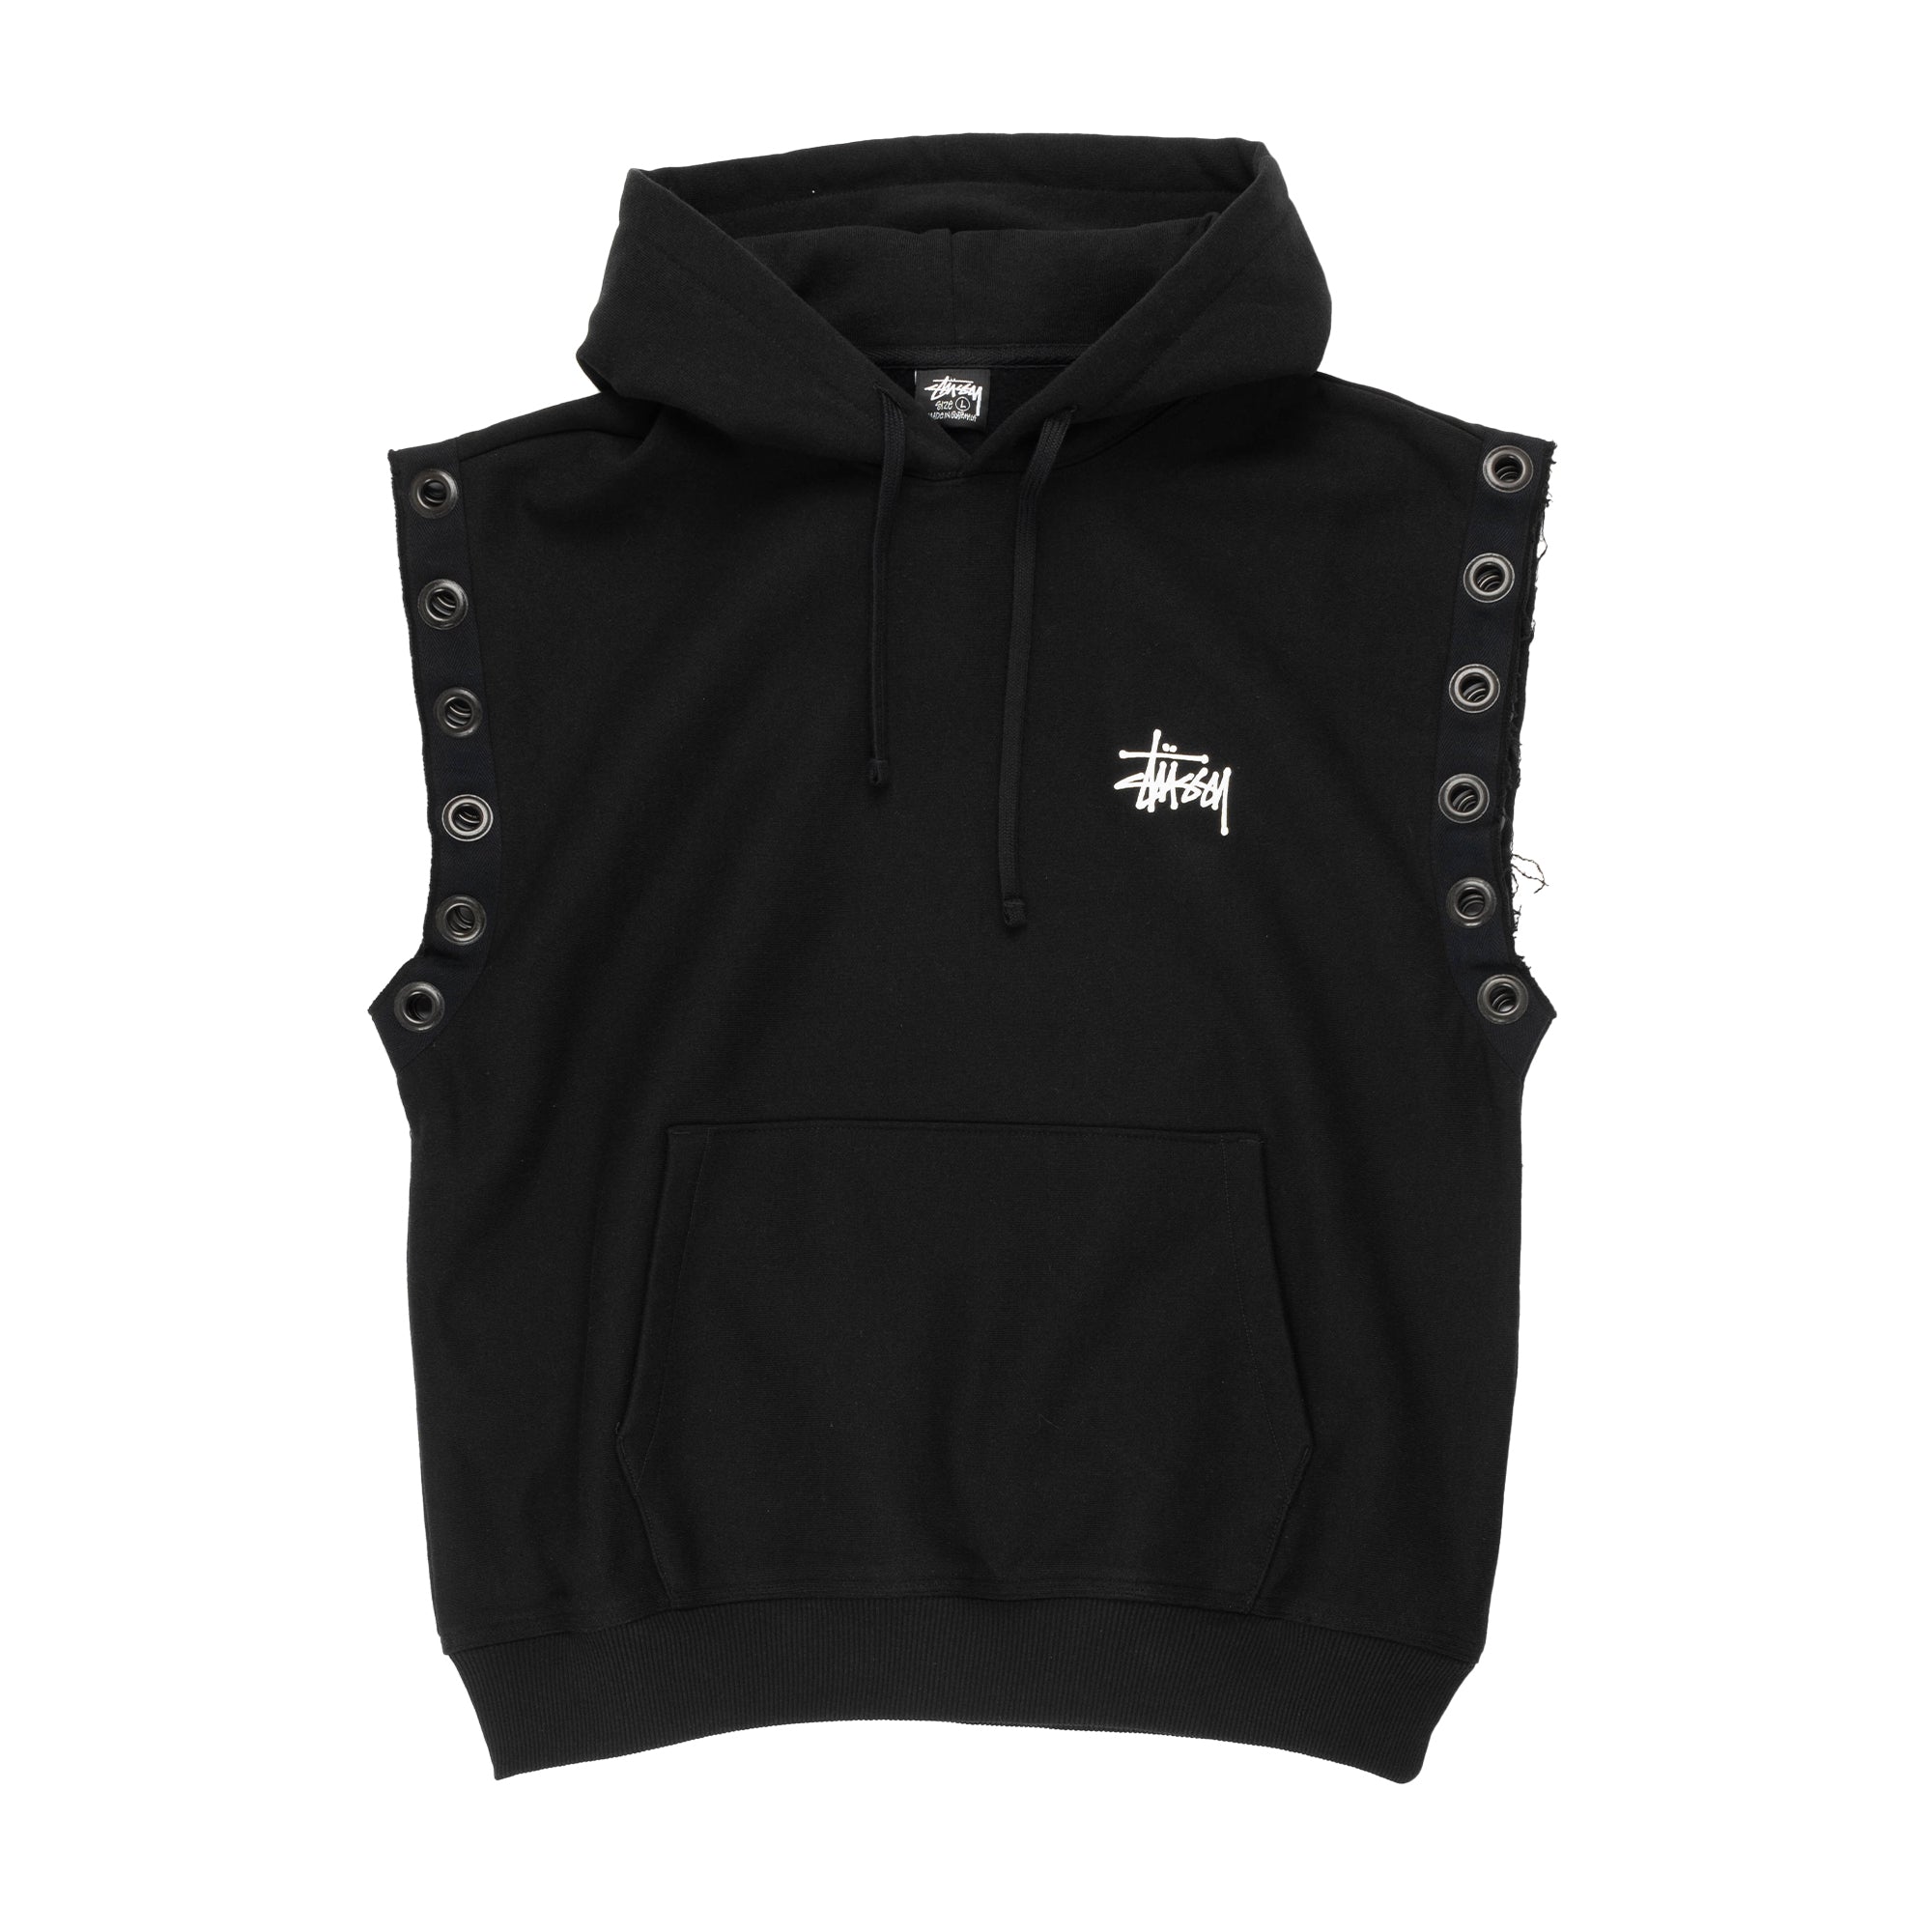 Nelson logo-patch pullover hoodie